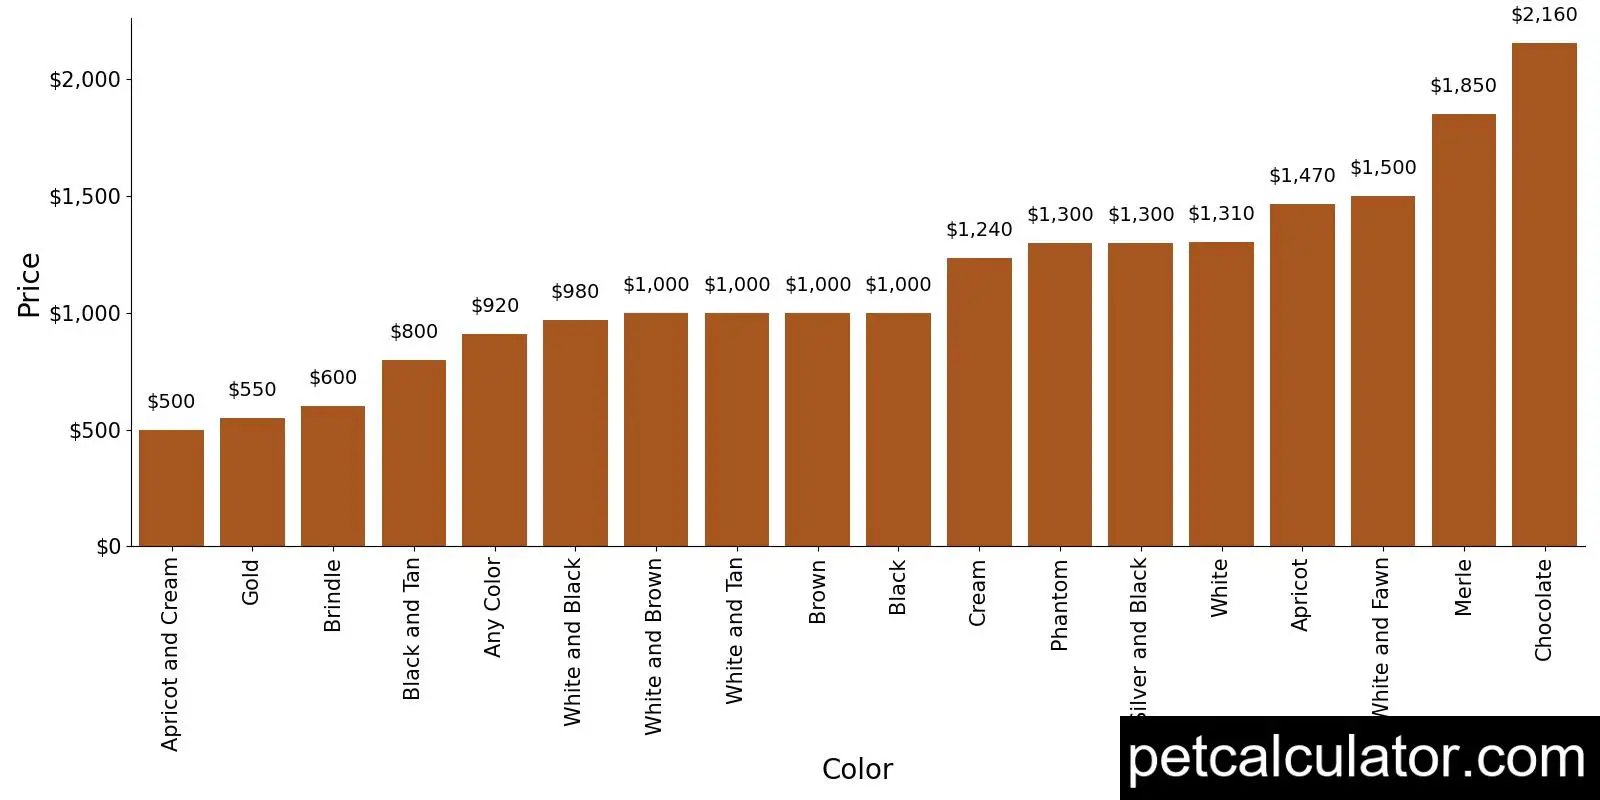 Price of Chi-Poo by Color 